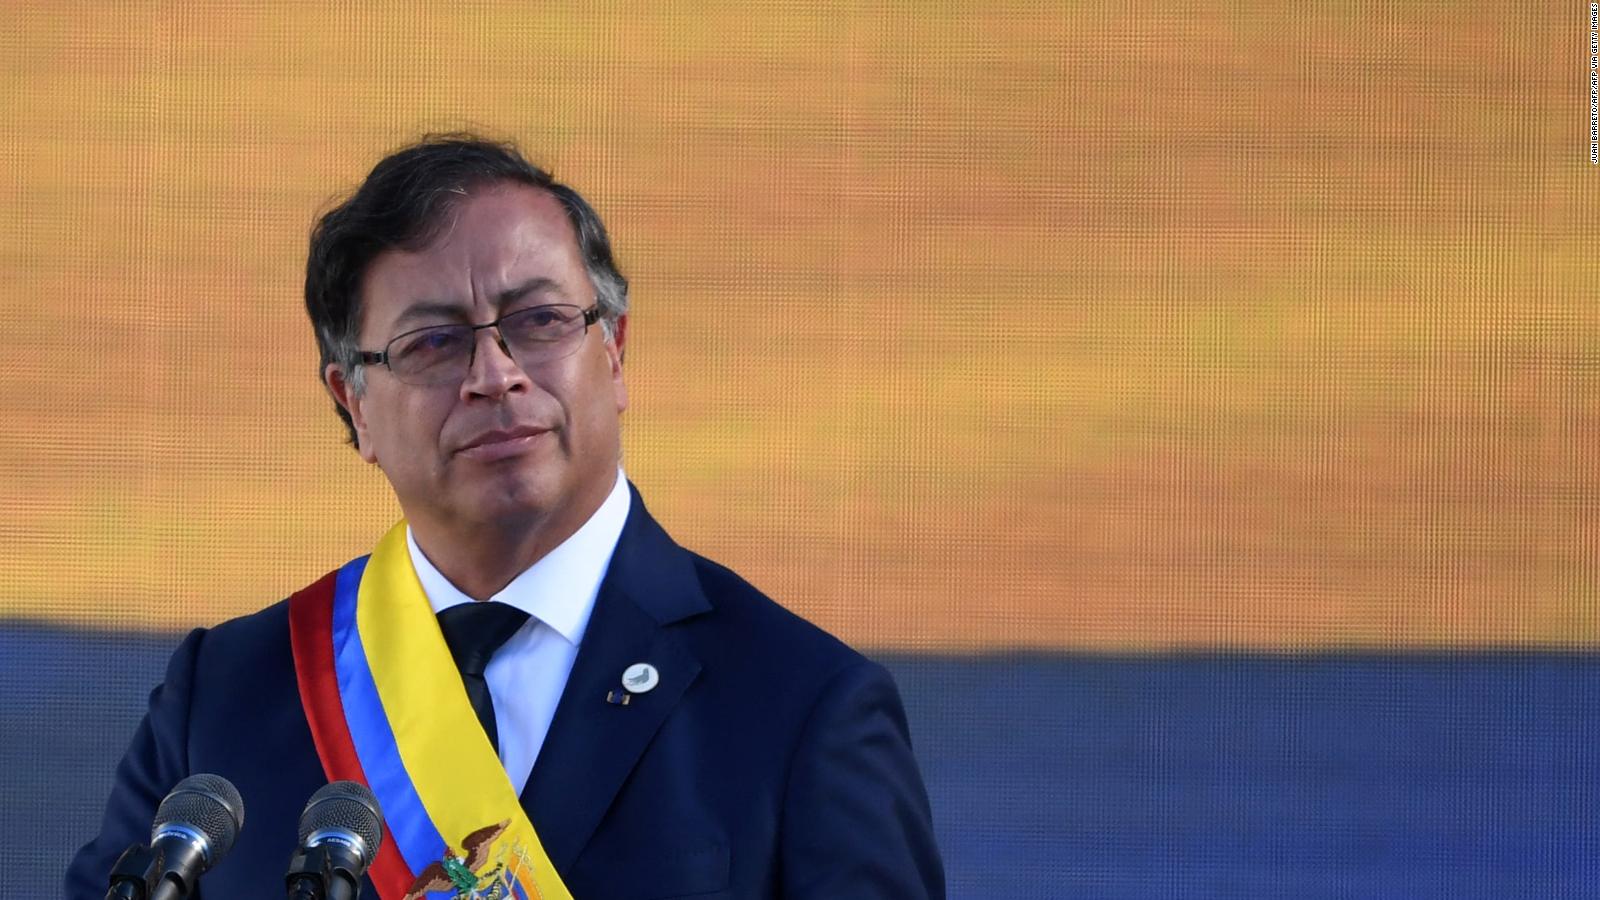 This was Petro's first speech as president of Colombia unity, peace